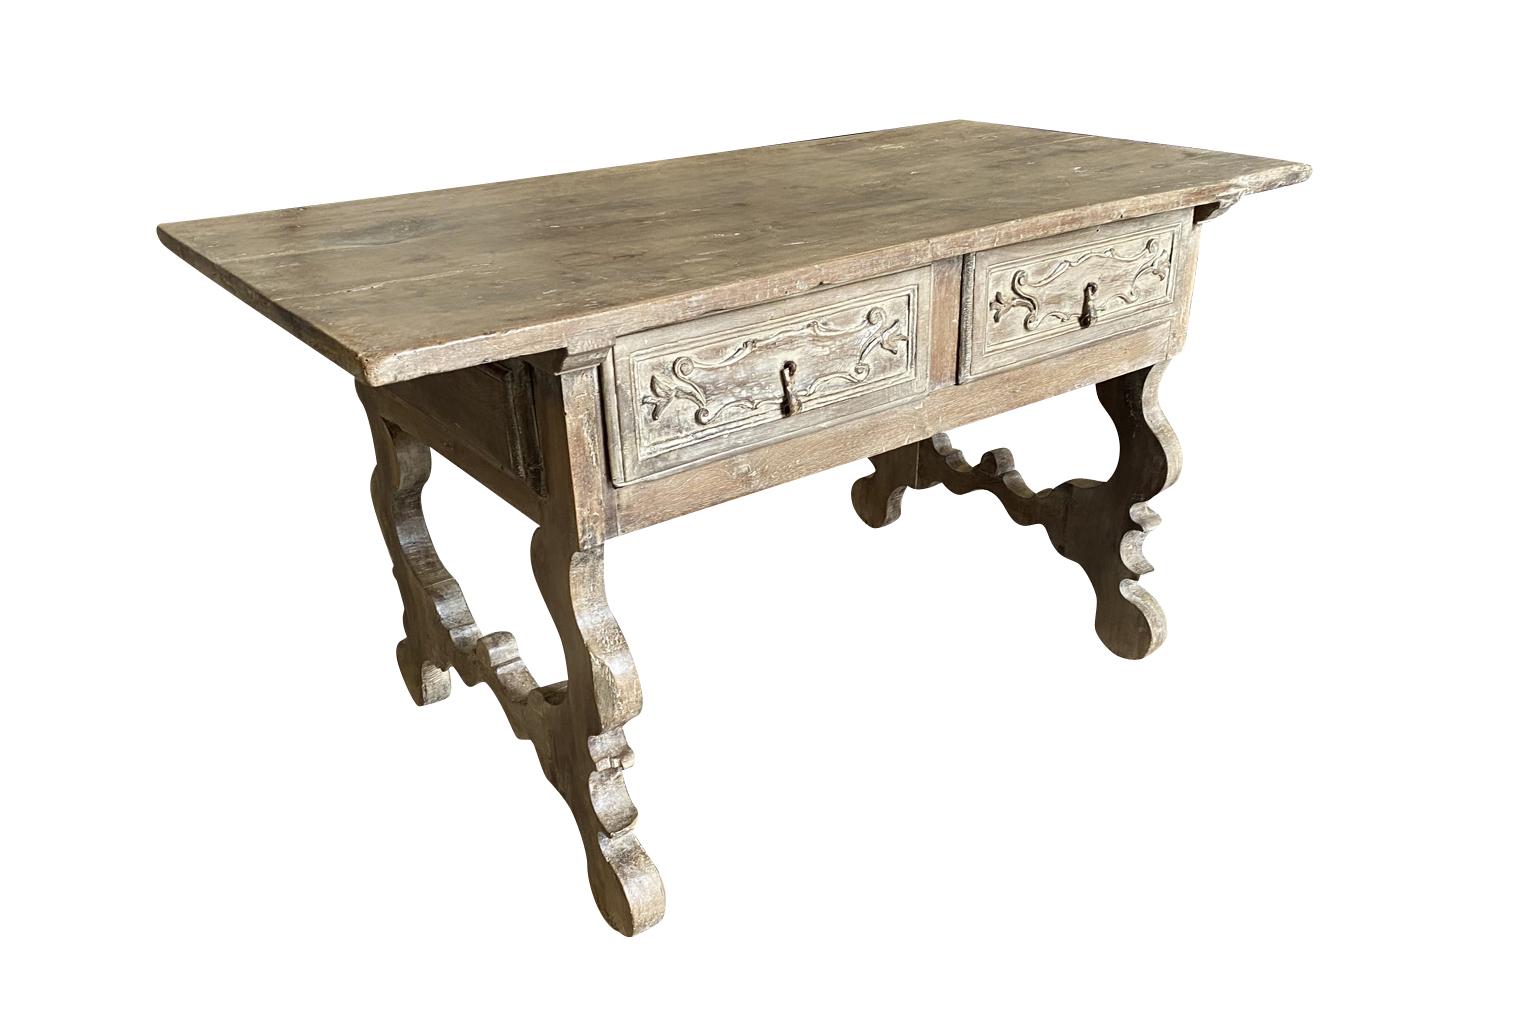 A very lovely 17th century center table - writing table from the Bologna area of Italy. Beautifully constructed from walnut with two drawers, classical lyre shaped legs and a solid board top. Stunning.